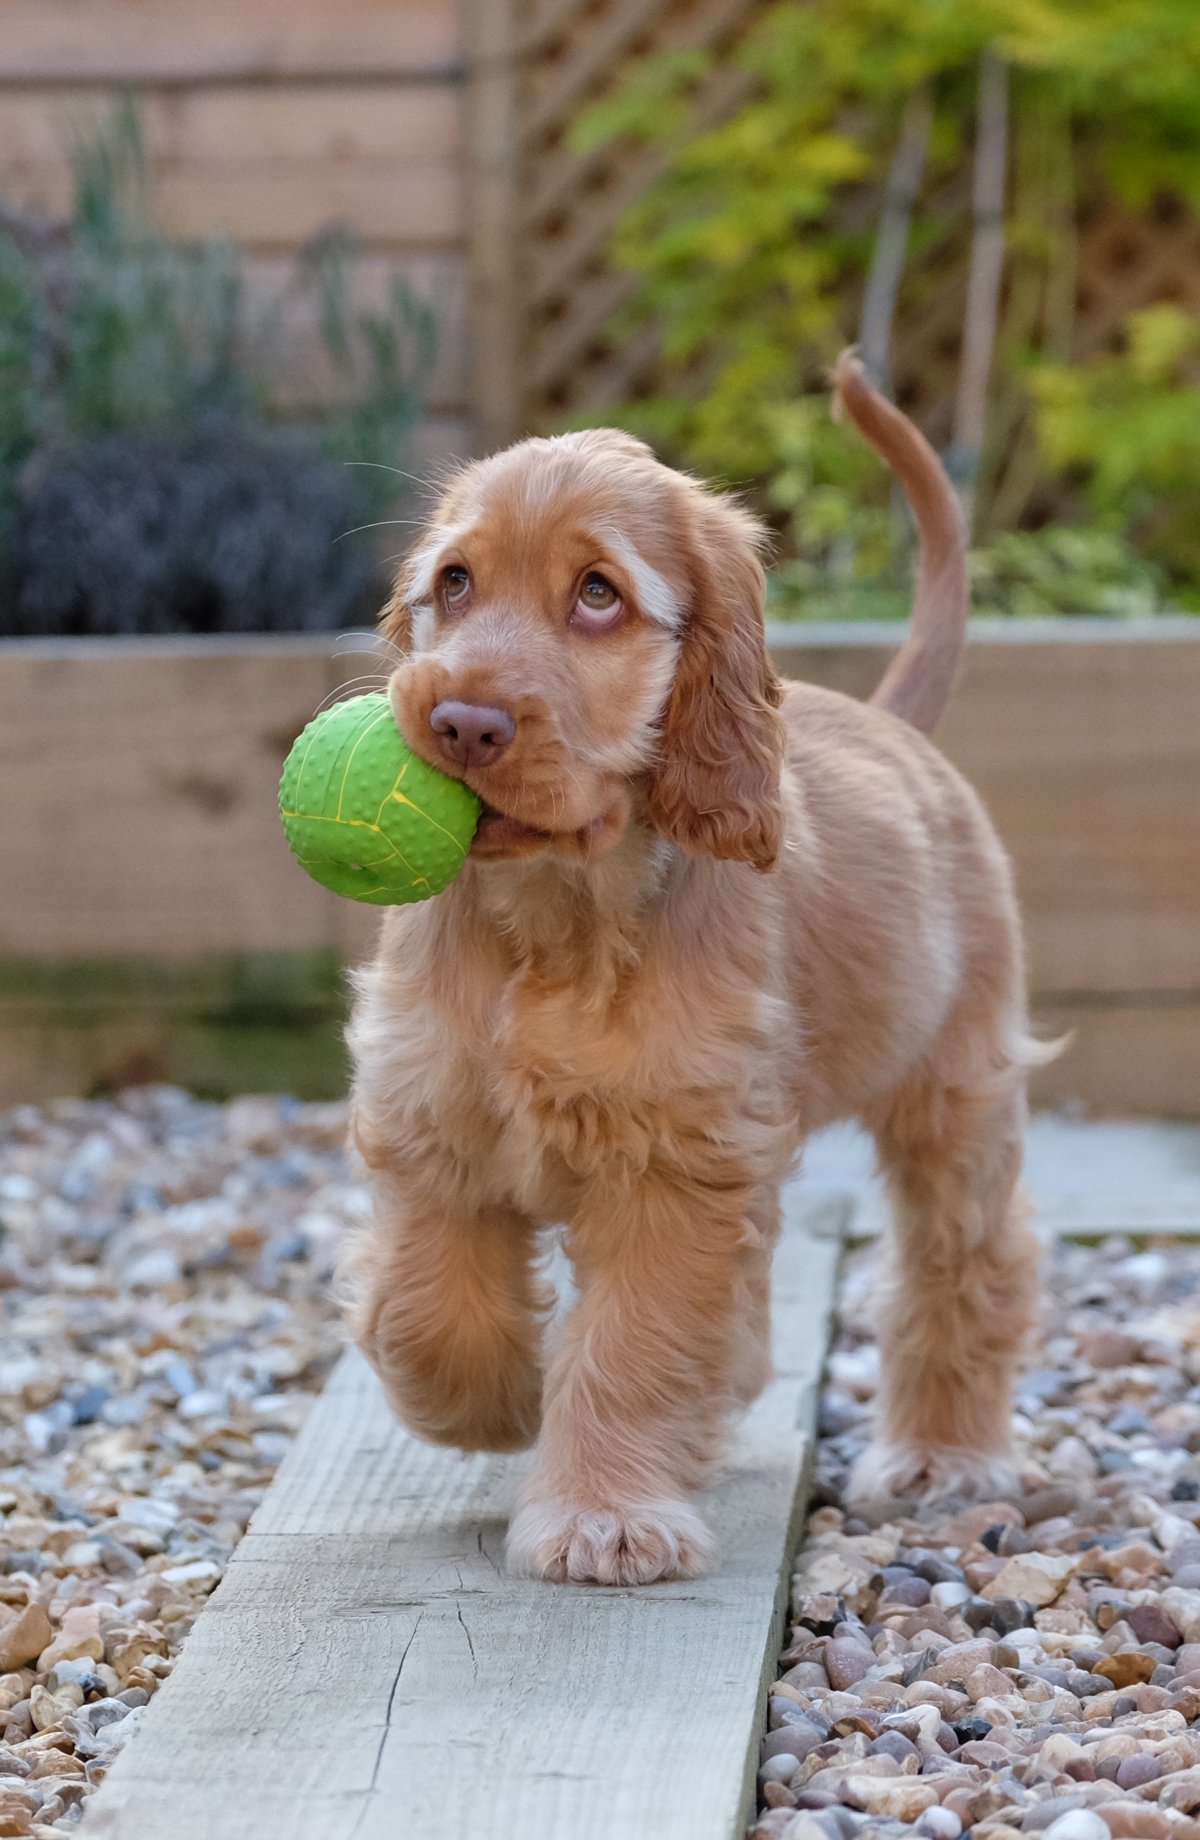 Cooper, 3 months old red gold sable english cocker spaniel puppy, good reasons to have a puppy / first published on perfect cocker spaniel blog / story and photo (c) Natalia Ashton